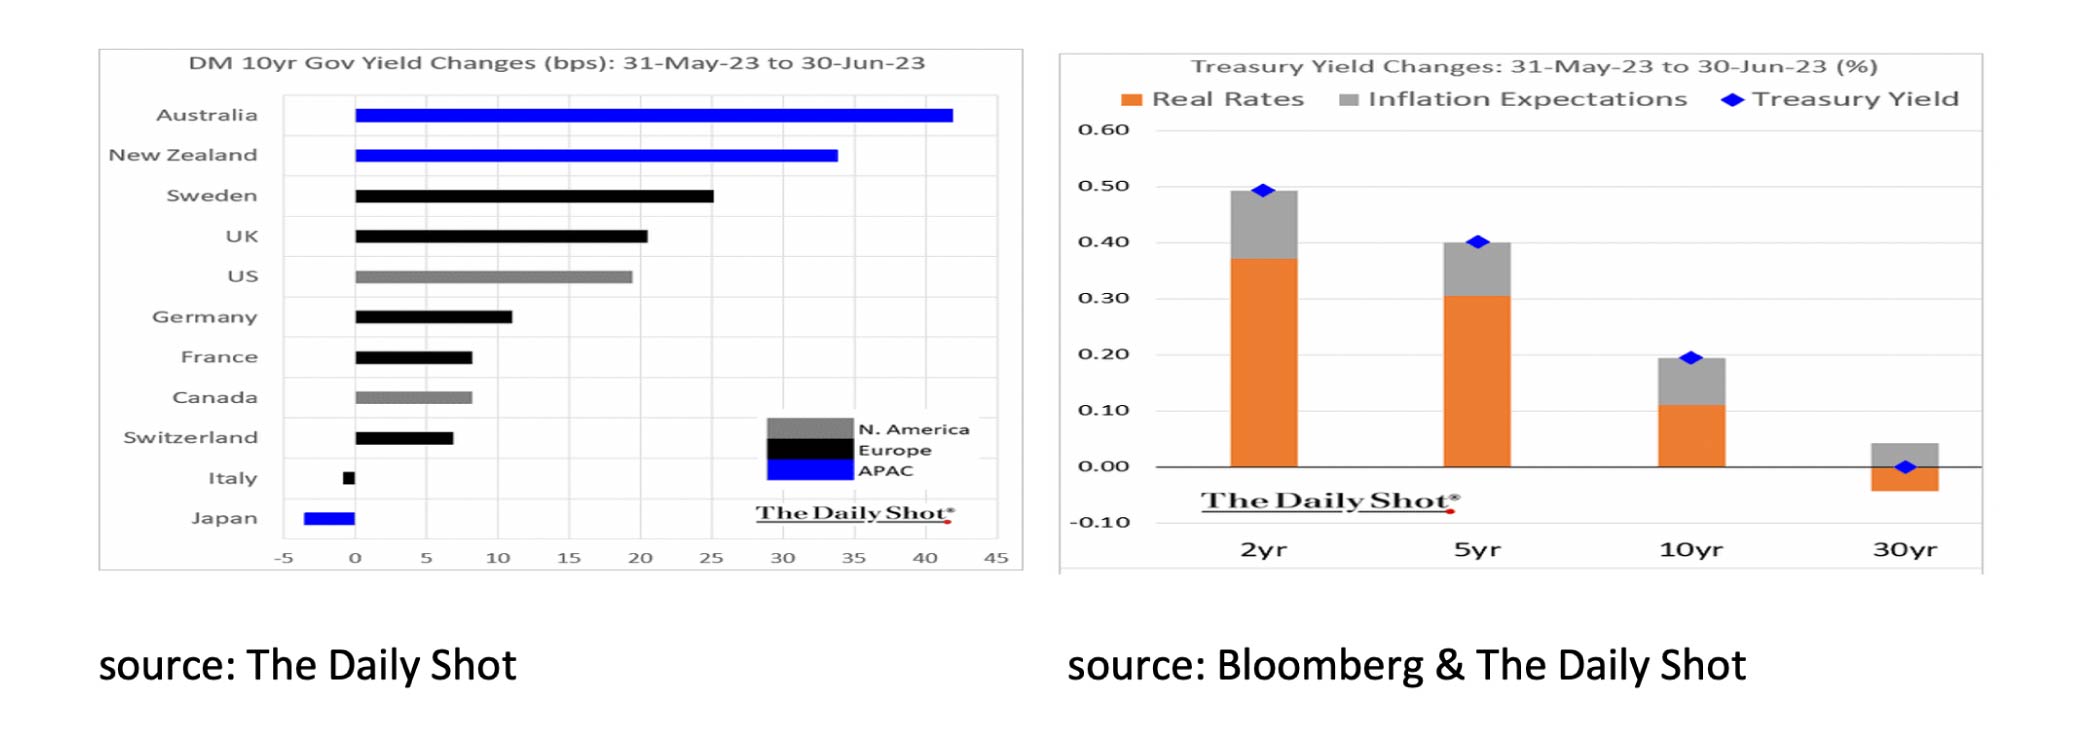 DM 10yr Gov Yield Changes (bps) 31 May 2023 to 30 June 2023